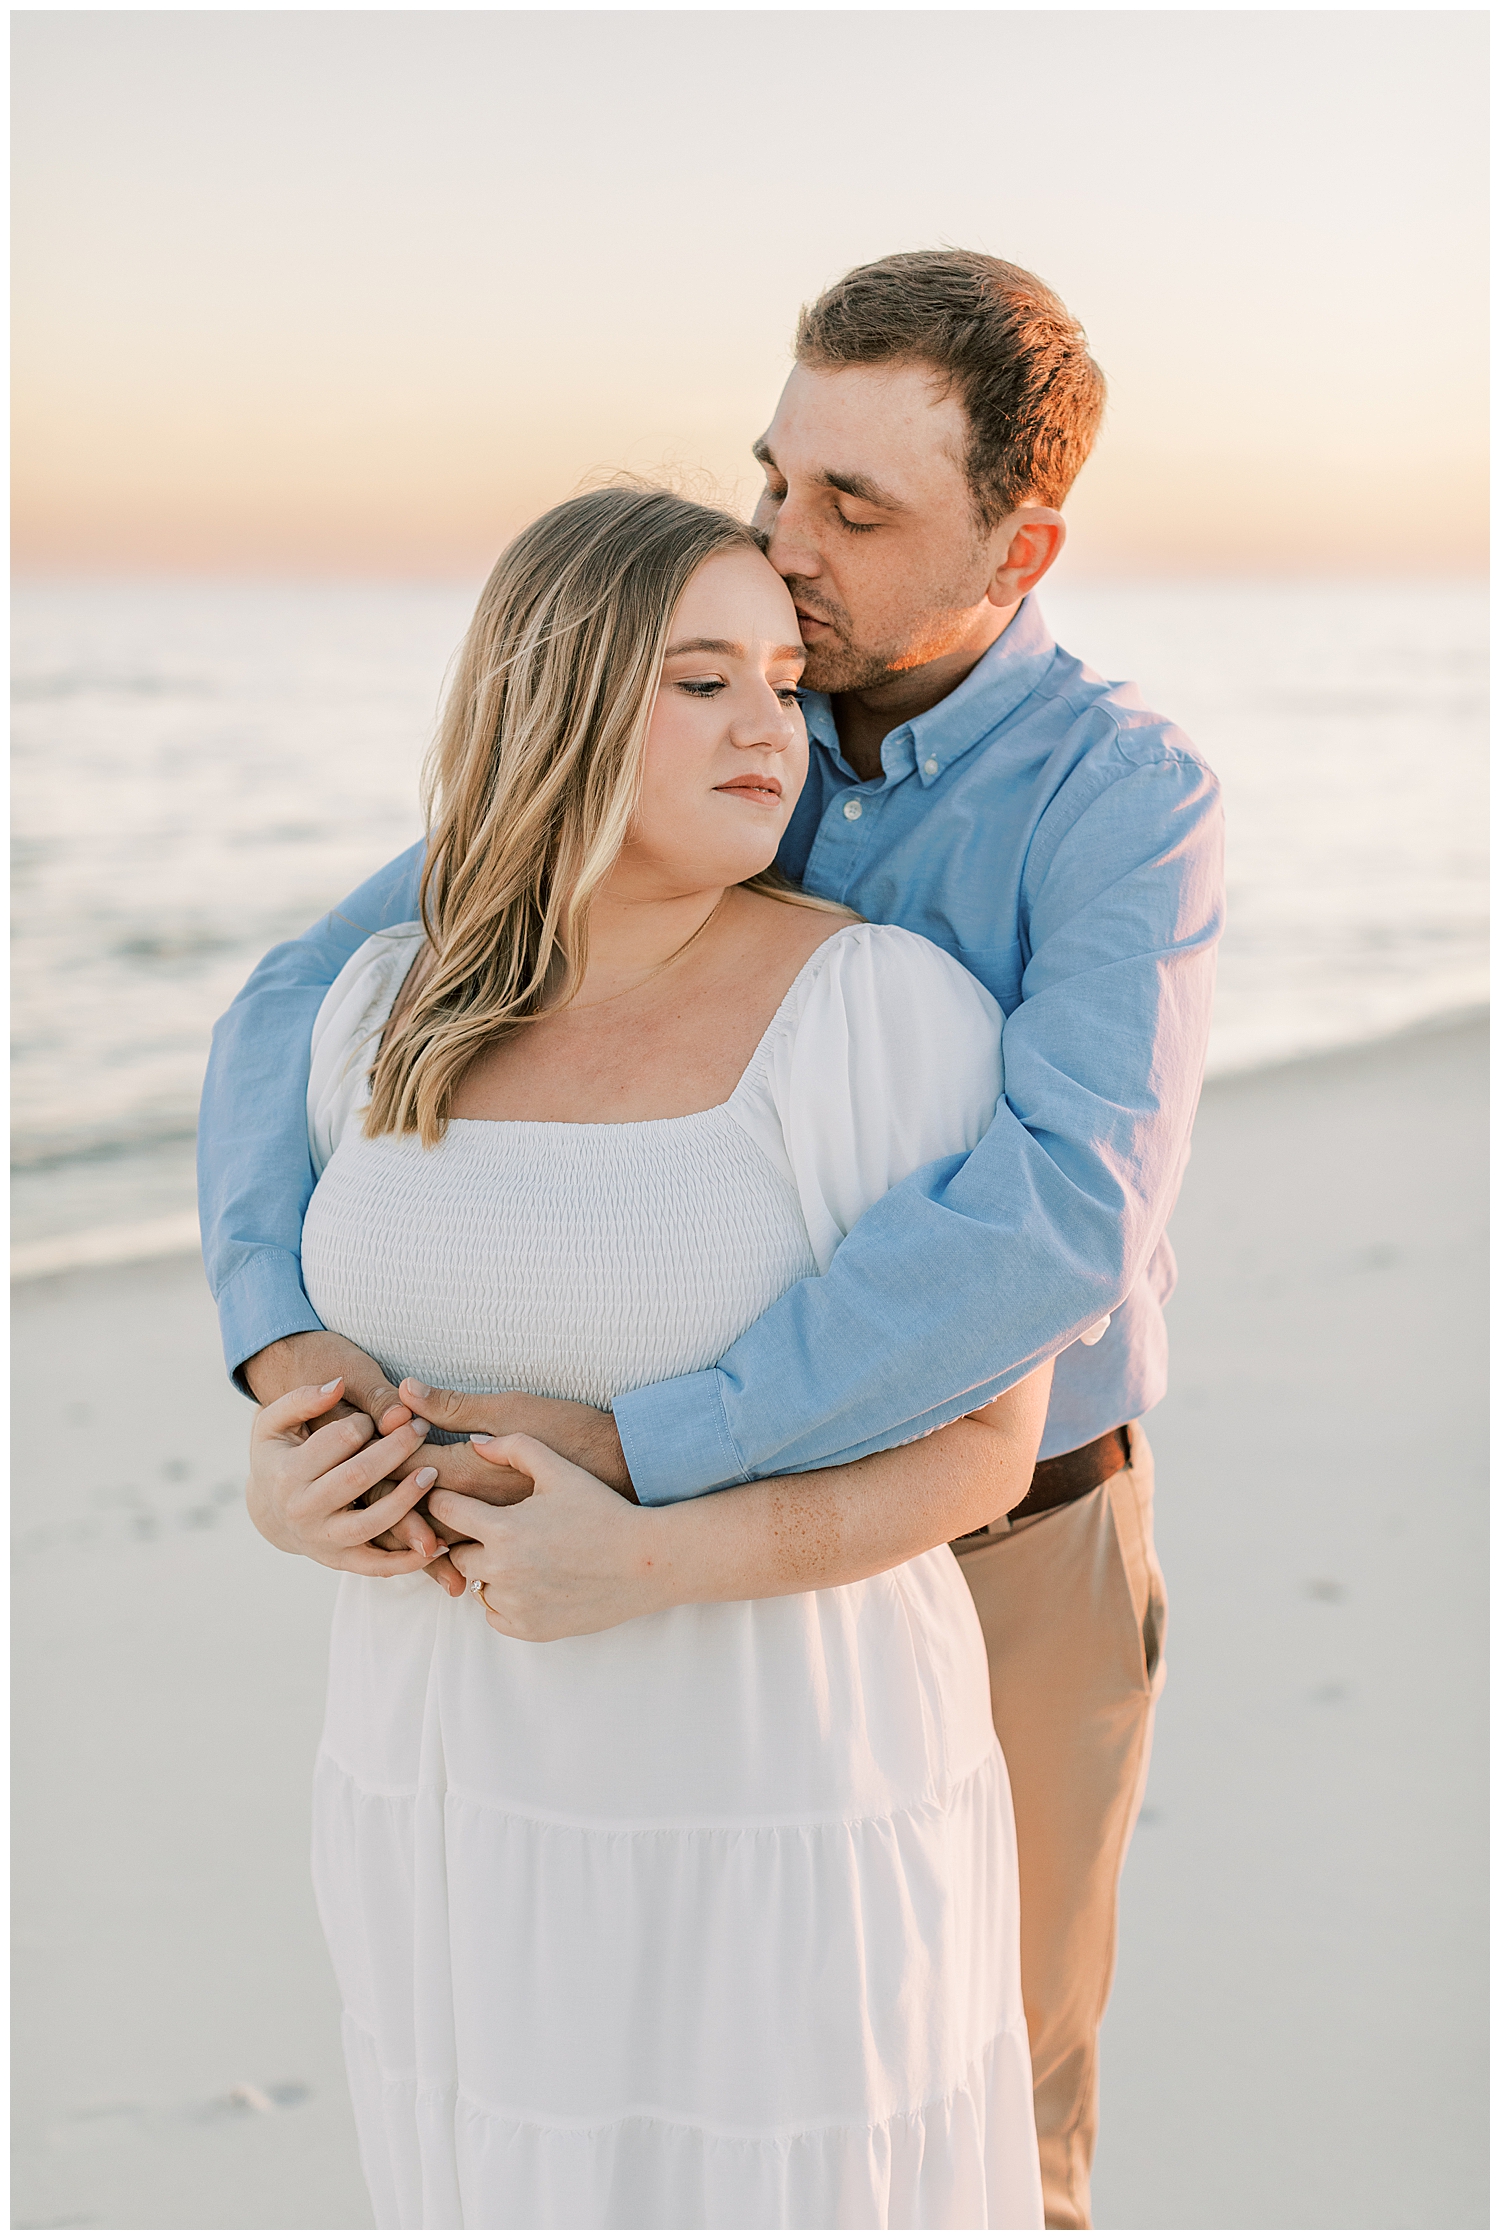 A couple stands on the beach at sunset for their engagement photos.